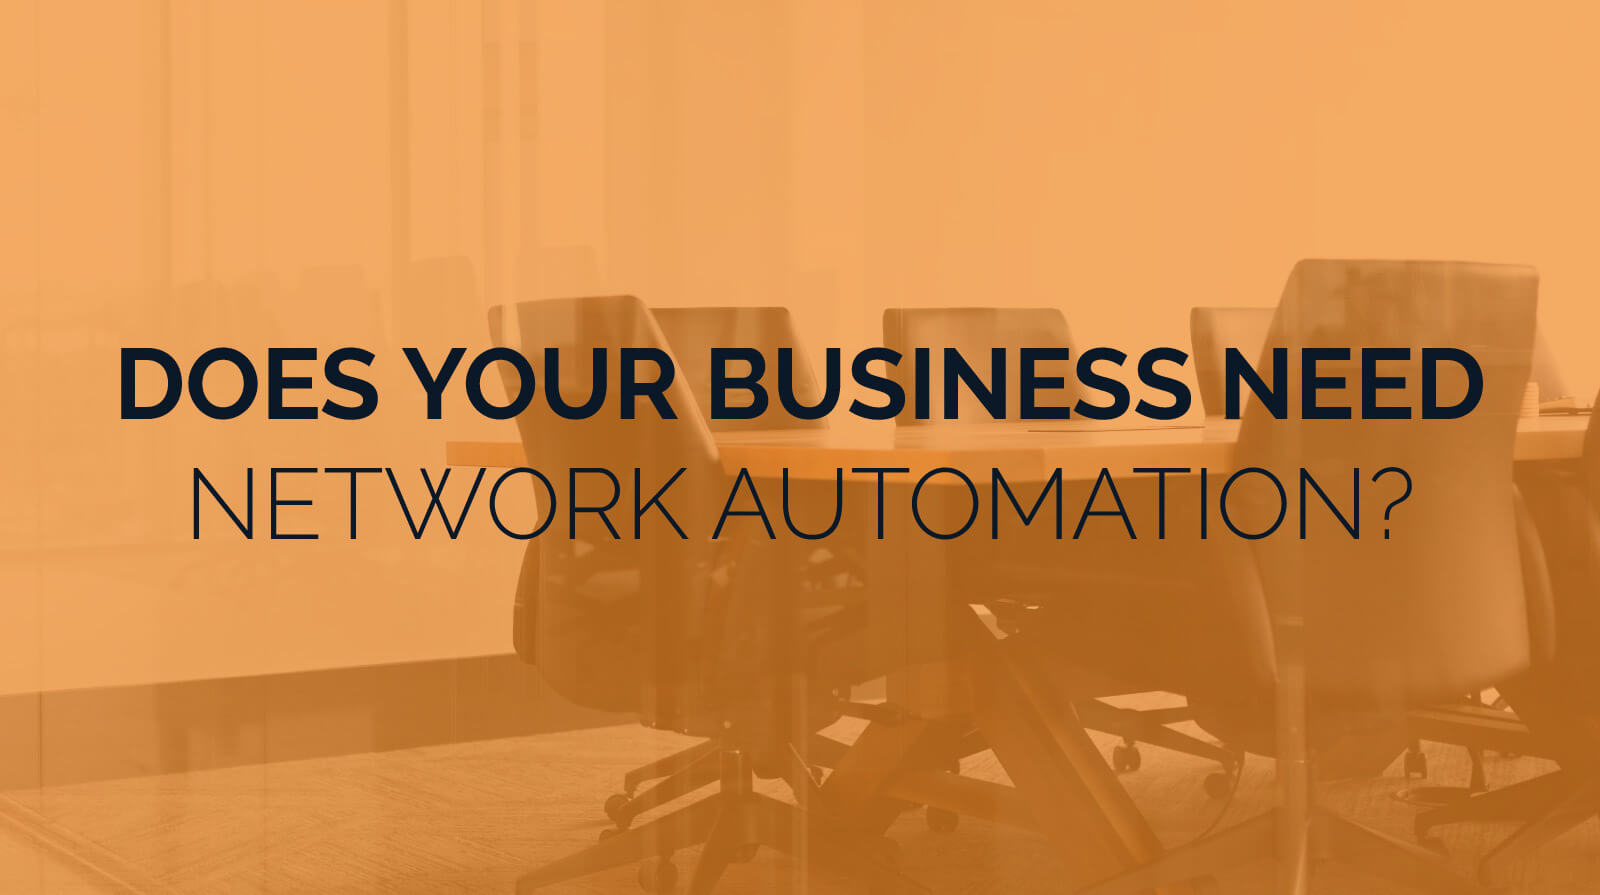 Does Your Business Need Network Automation